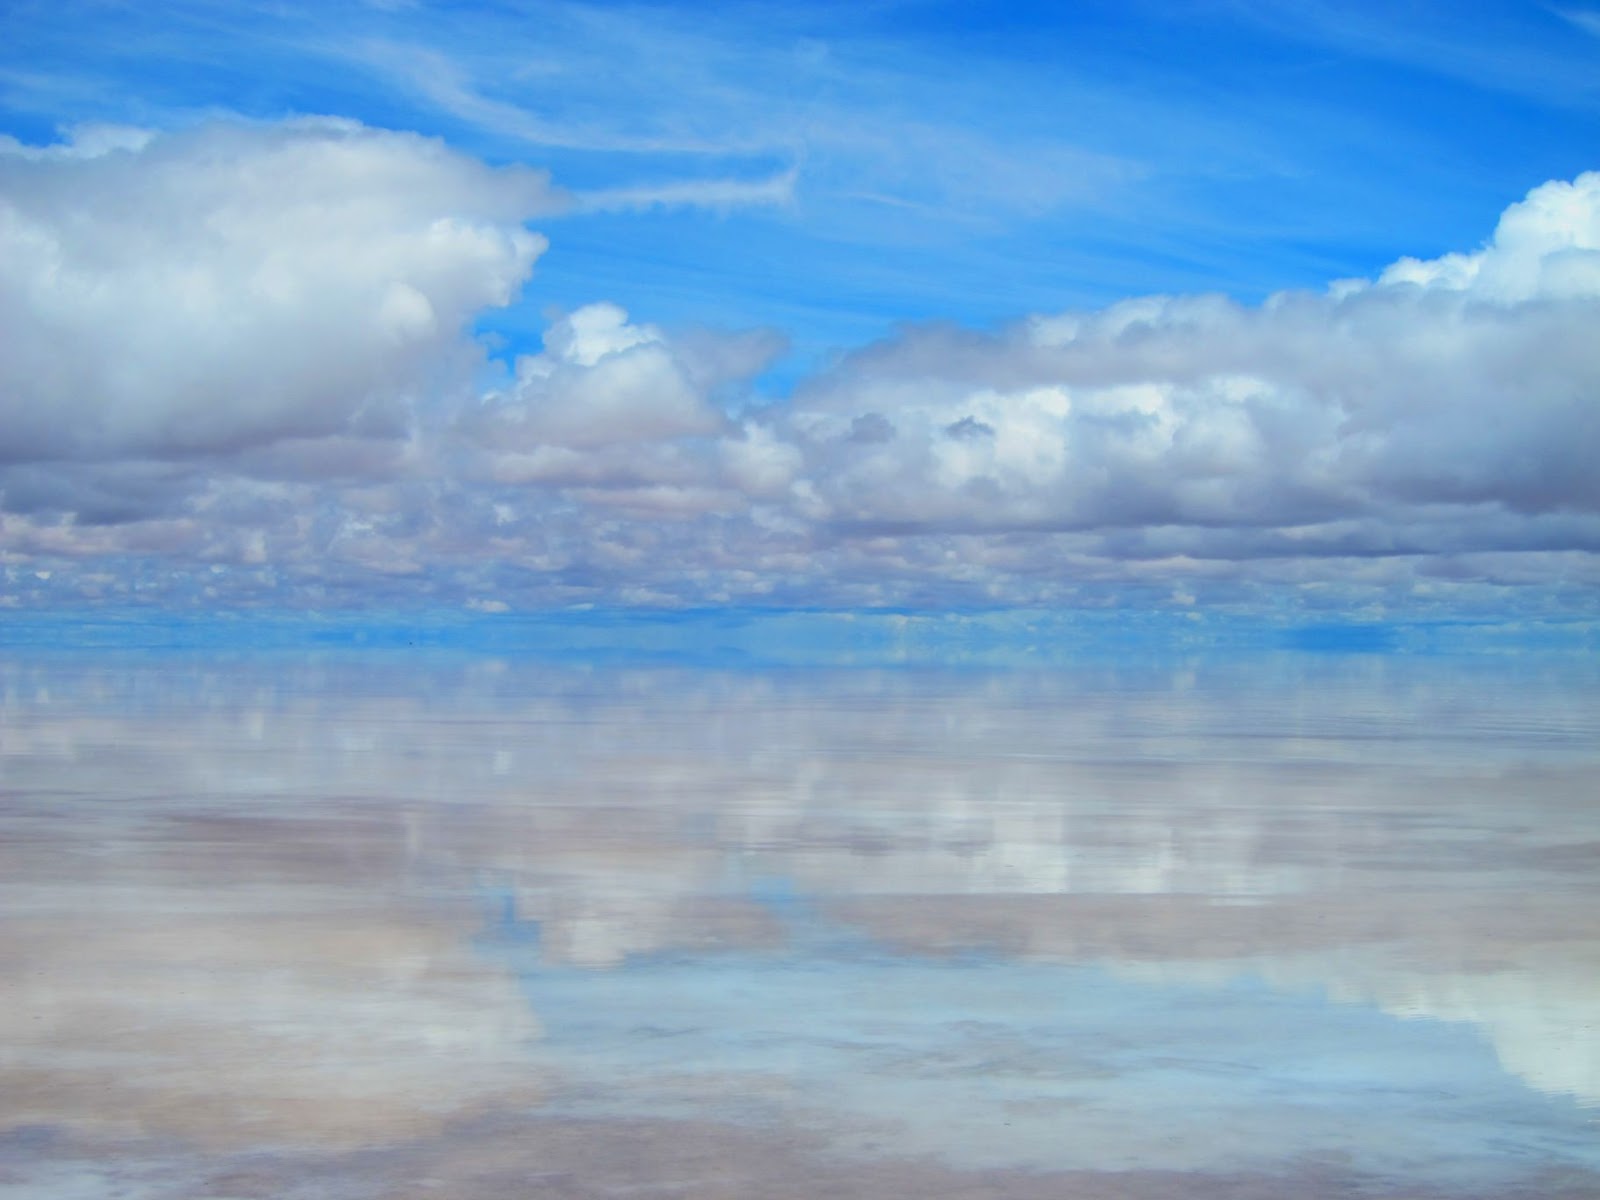 360 Degrees in 360 Days: Salar de Uyuni tour : The Good, the Bad and ...